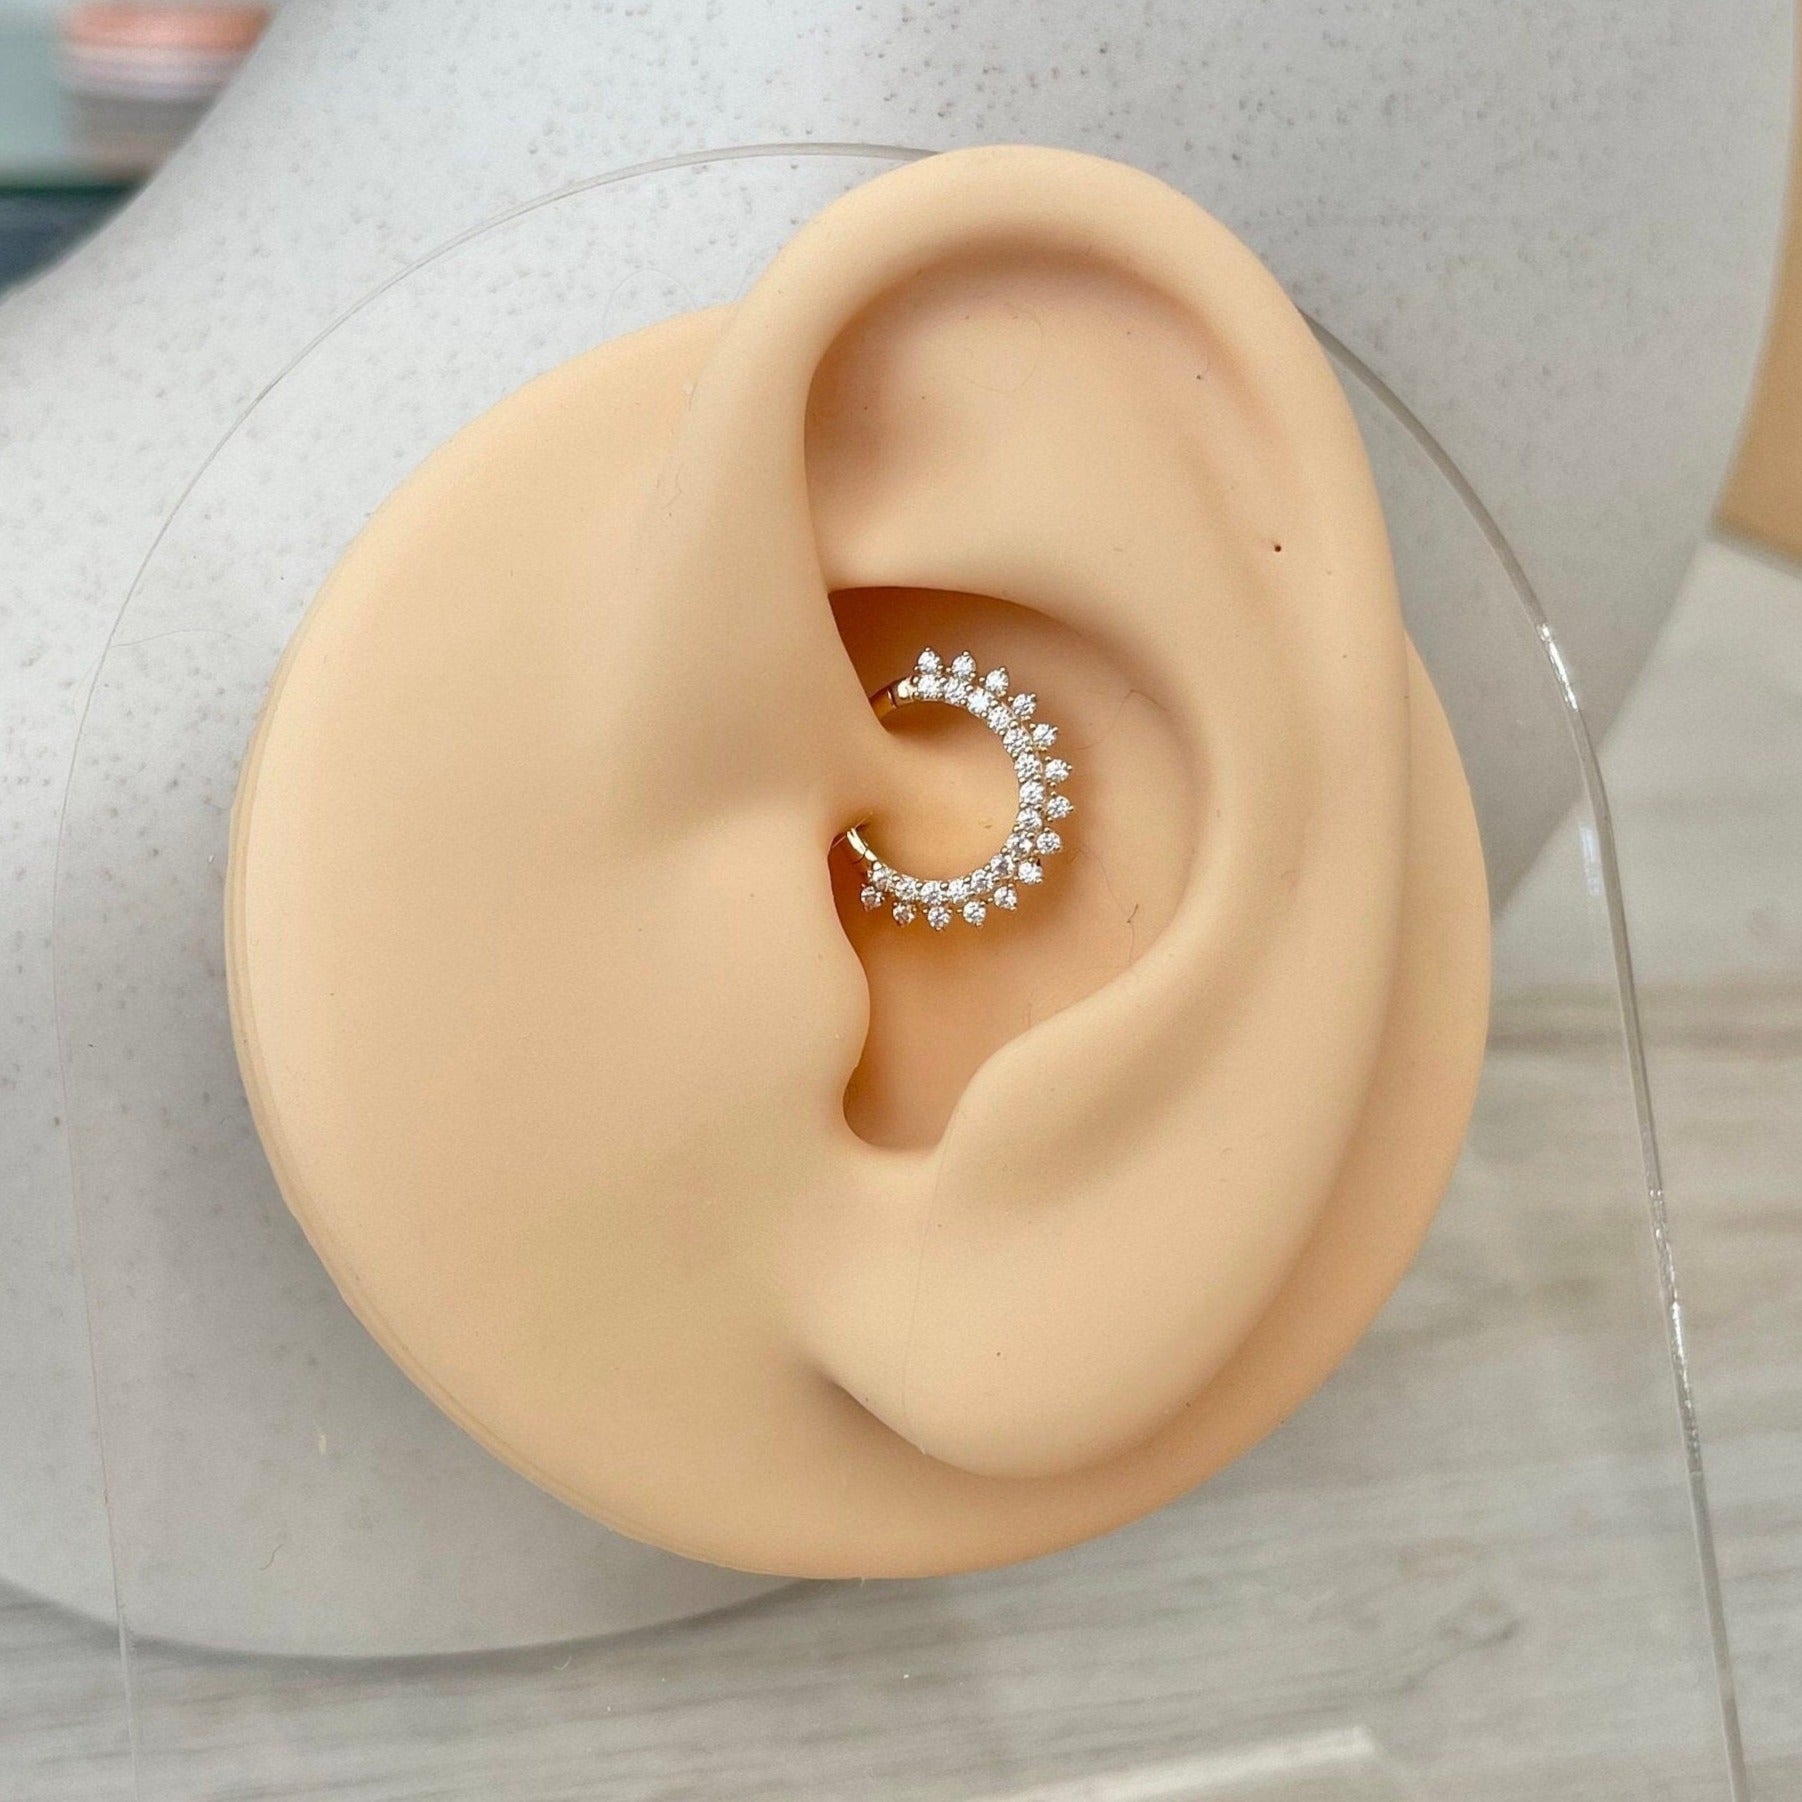 Solid White Gold Daith Earring (16G, 8mm or 10mm, 14k Yellow or White Solid Gold)